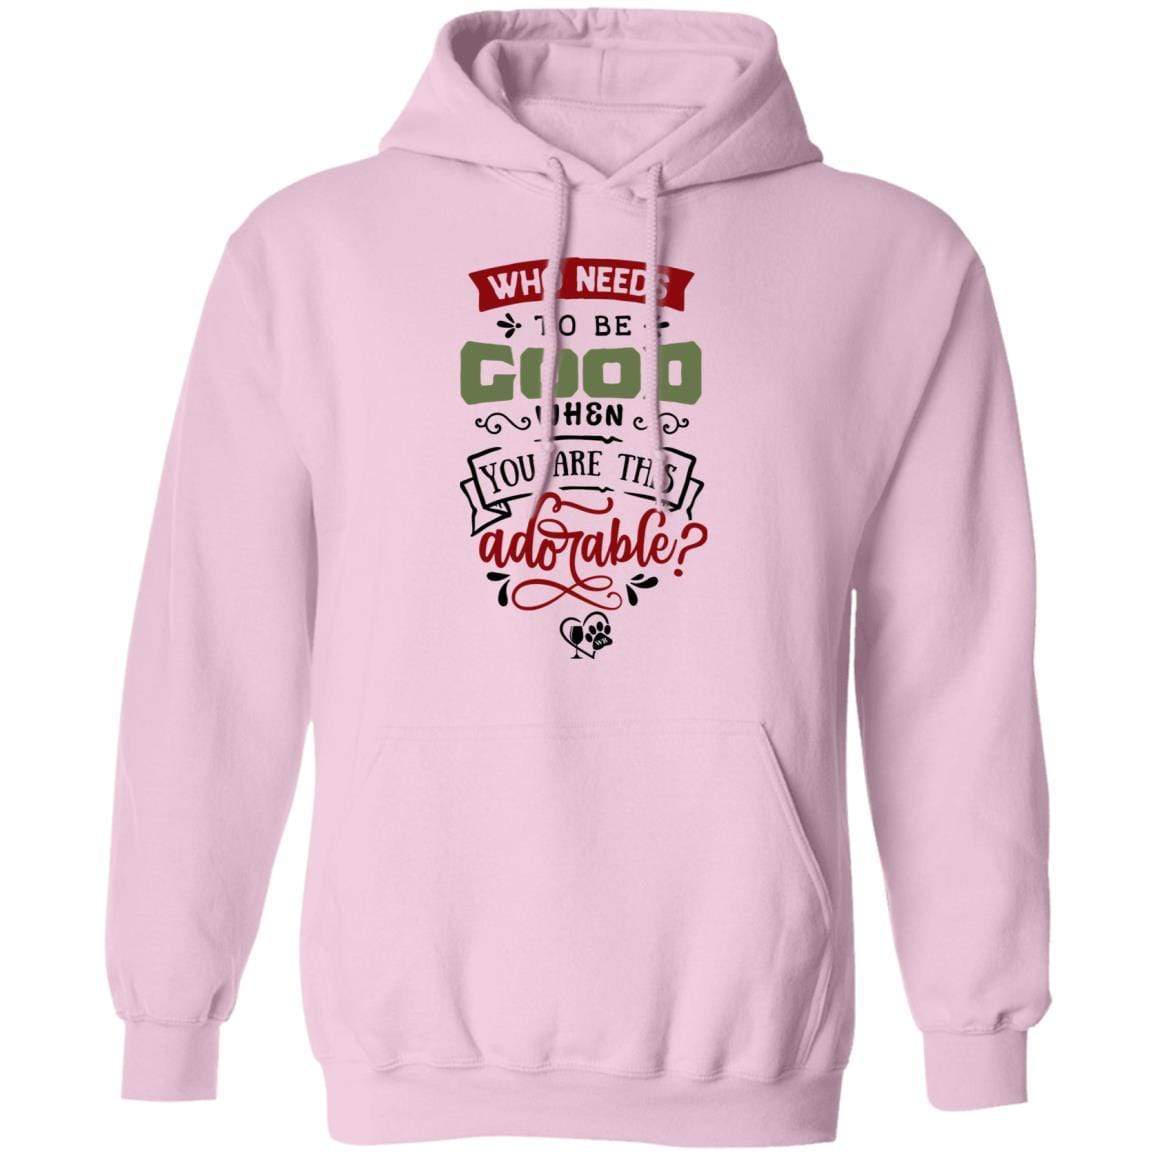 Sweatshirts Light Pink / S WineyBitches.Co "Who Needs To Be Good When You Are This Adorable" Pullover Hoodie 8 oz. WineyBitchesCo